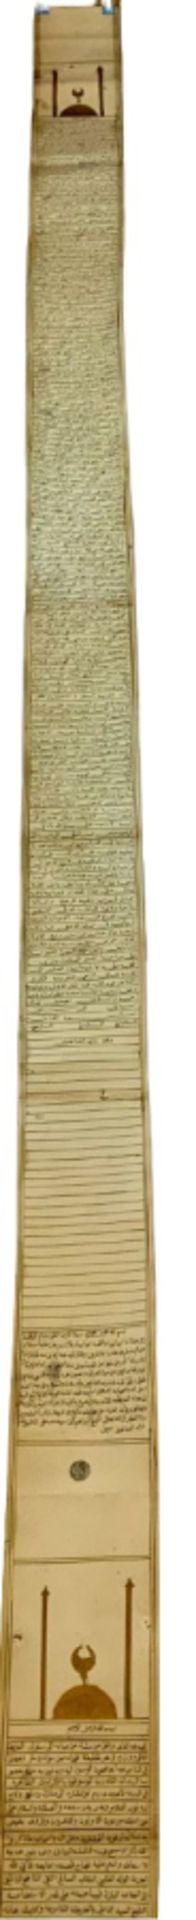 A rare and intriguing Ottoman Period document (19th century) - Image 4 of 41